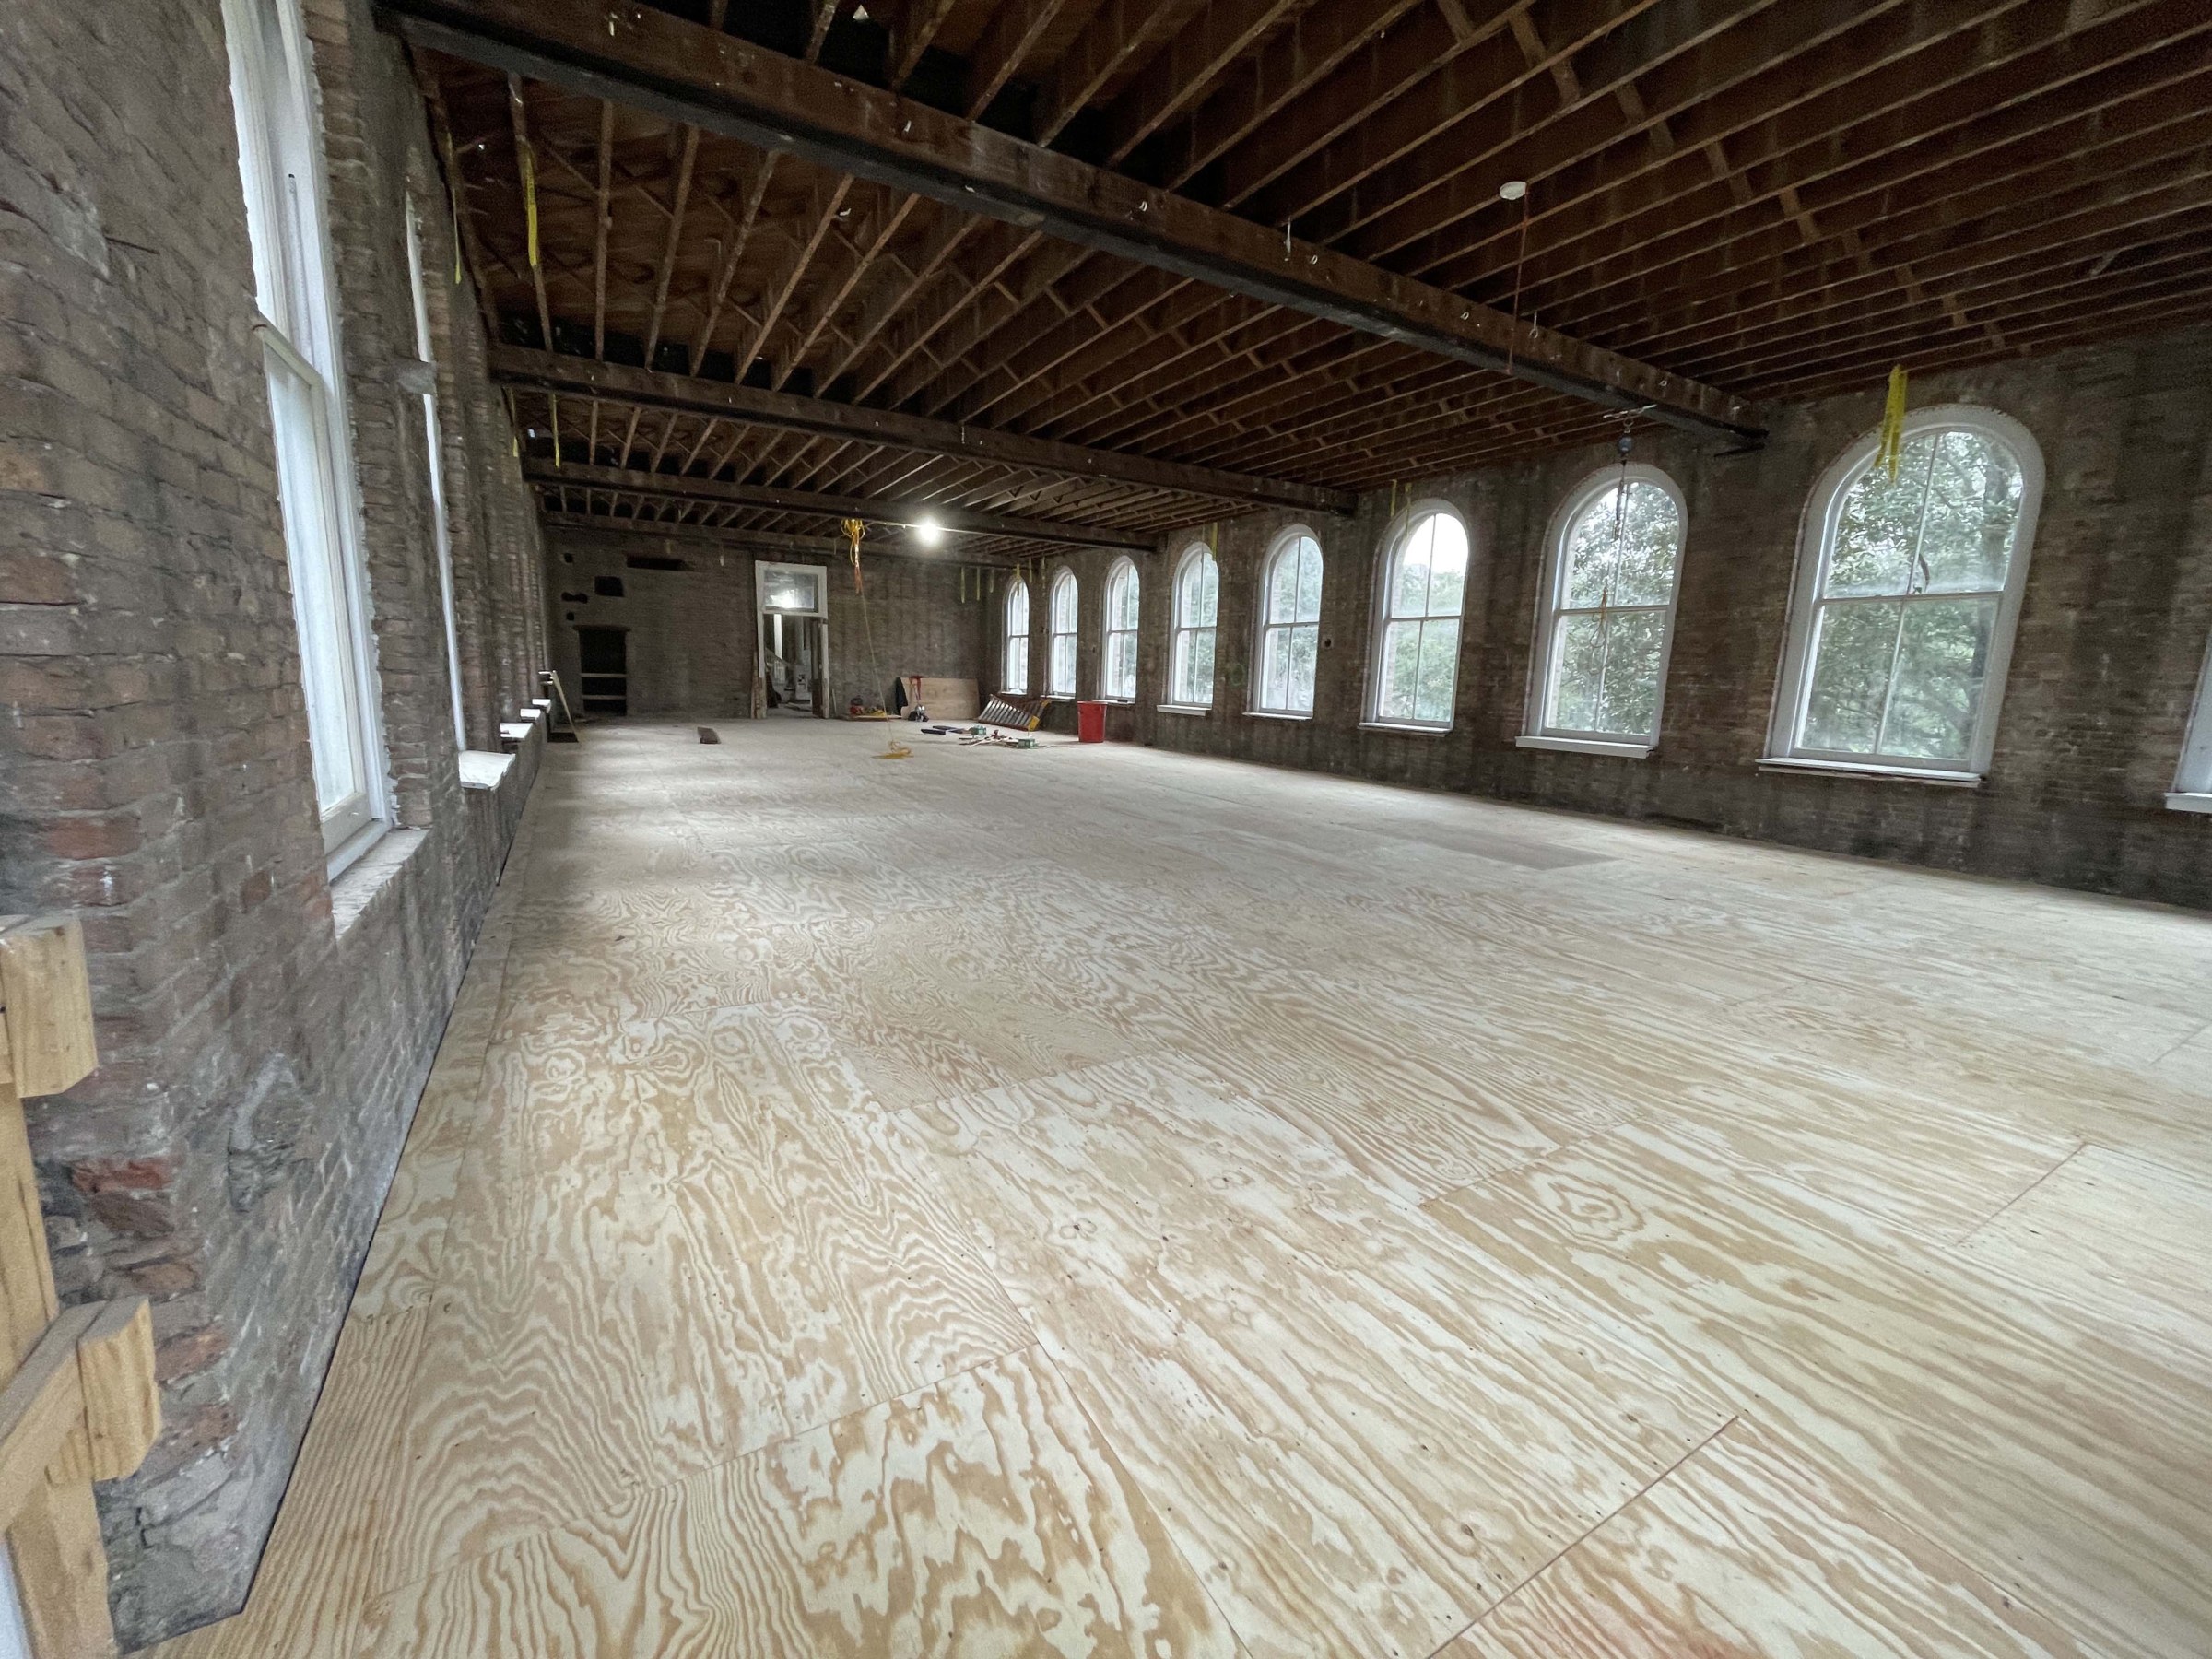 Interior of large room undergoing historic renovation with new wood floors and exposed ceiling beams high above.